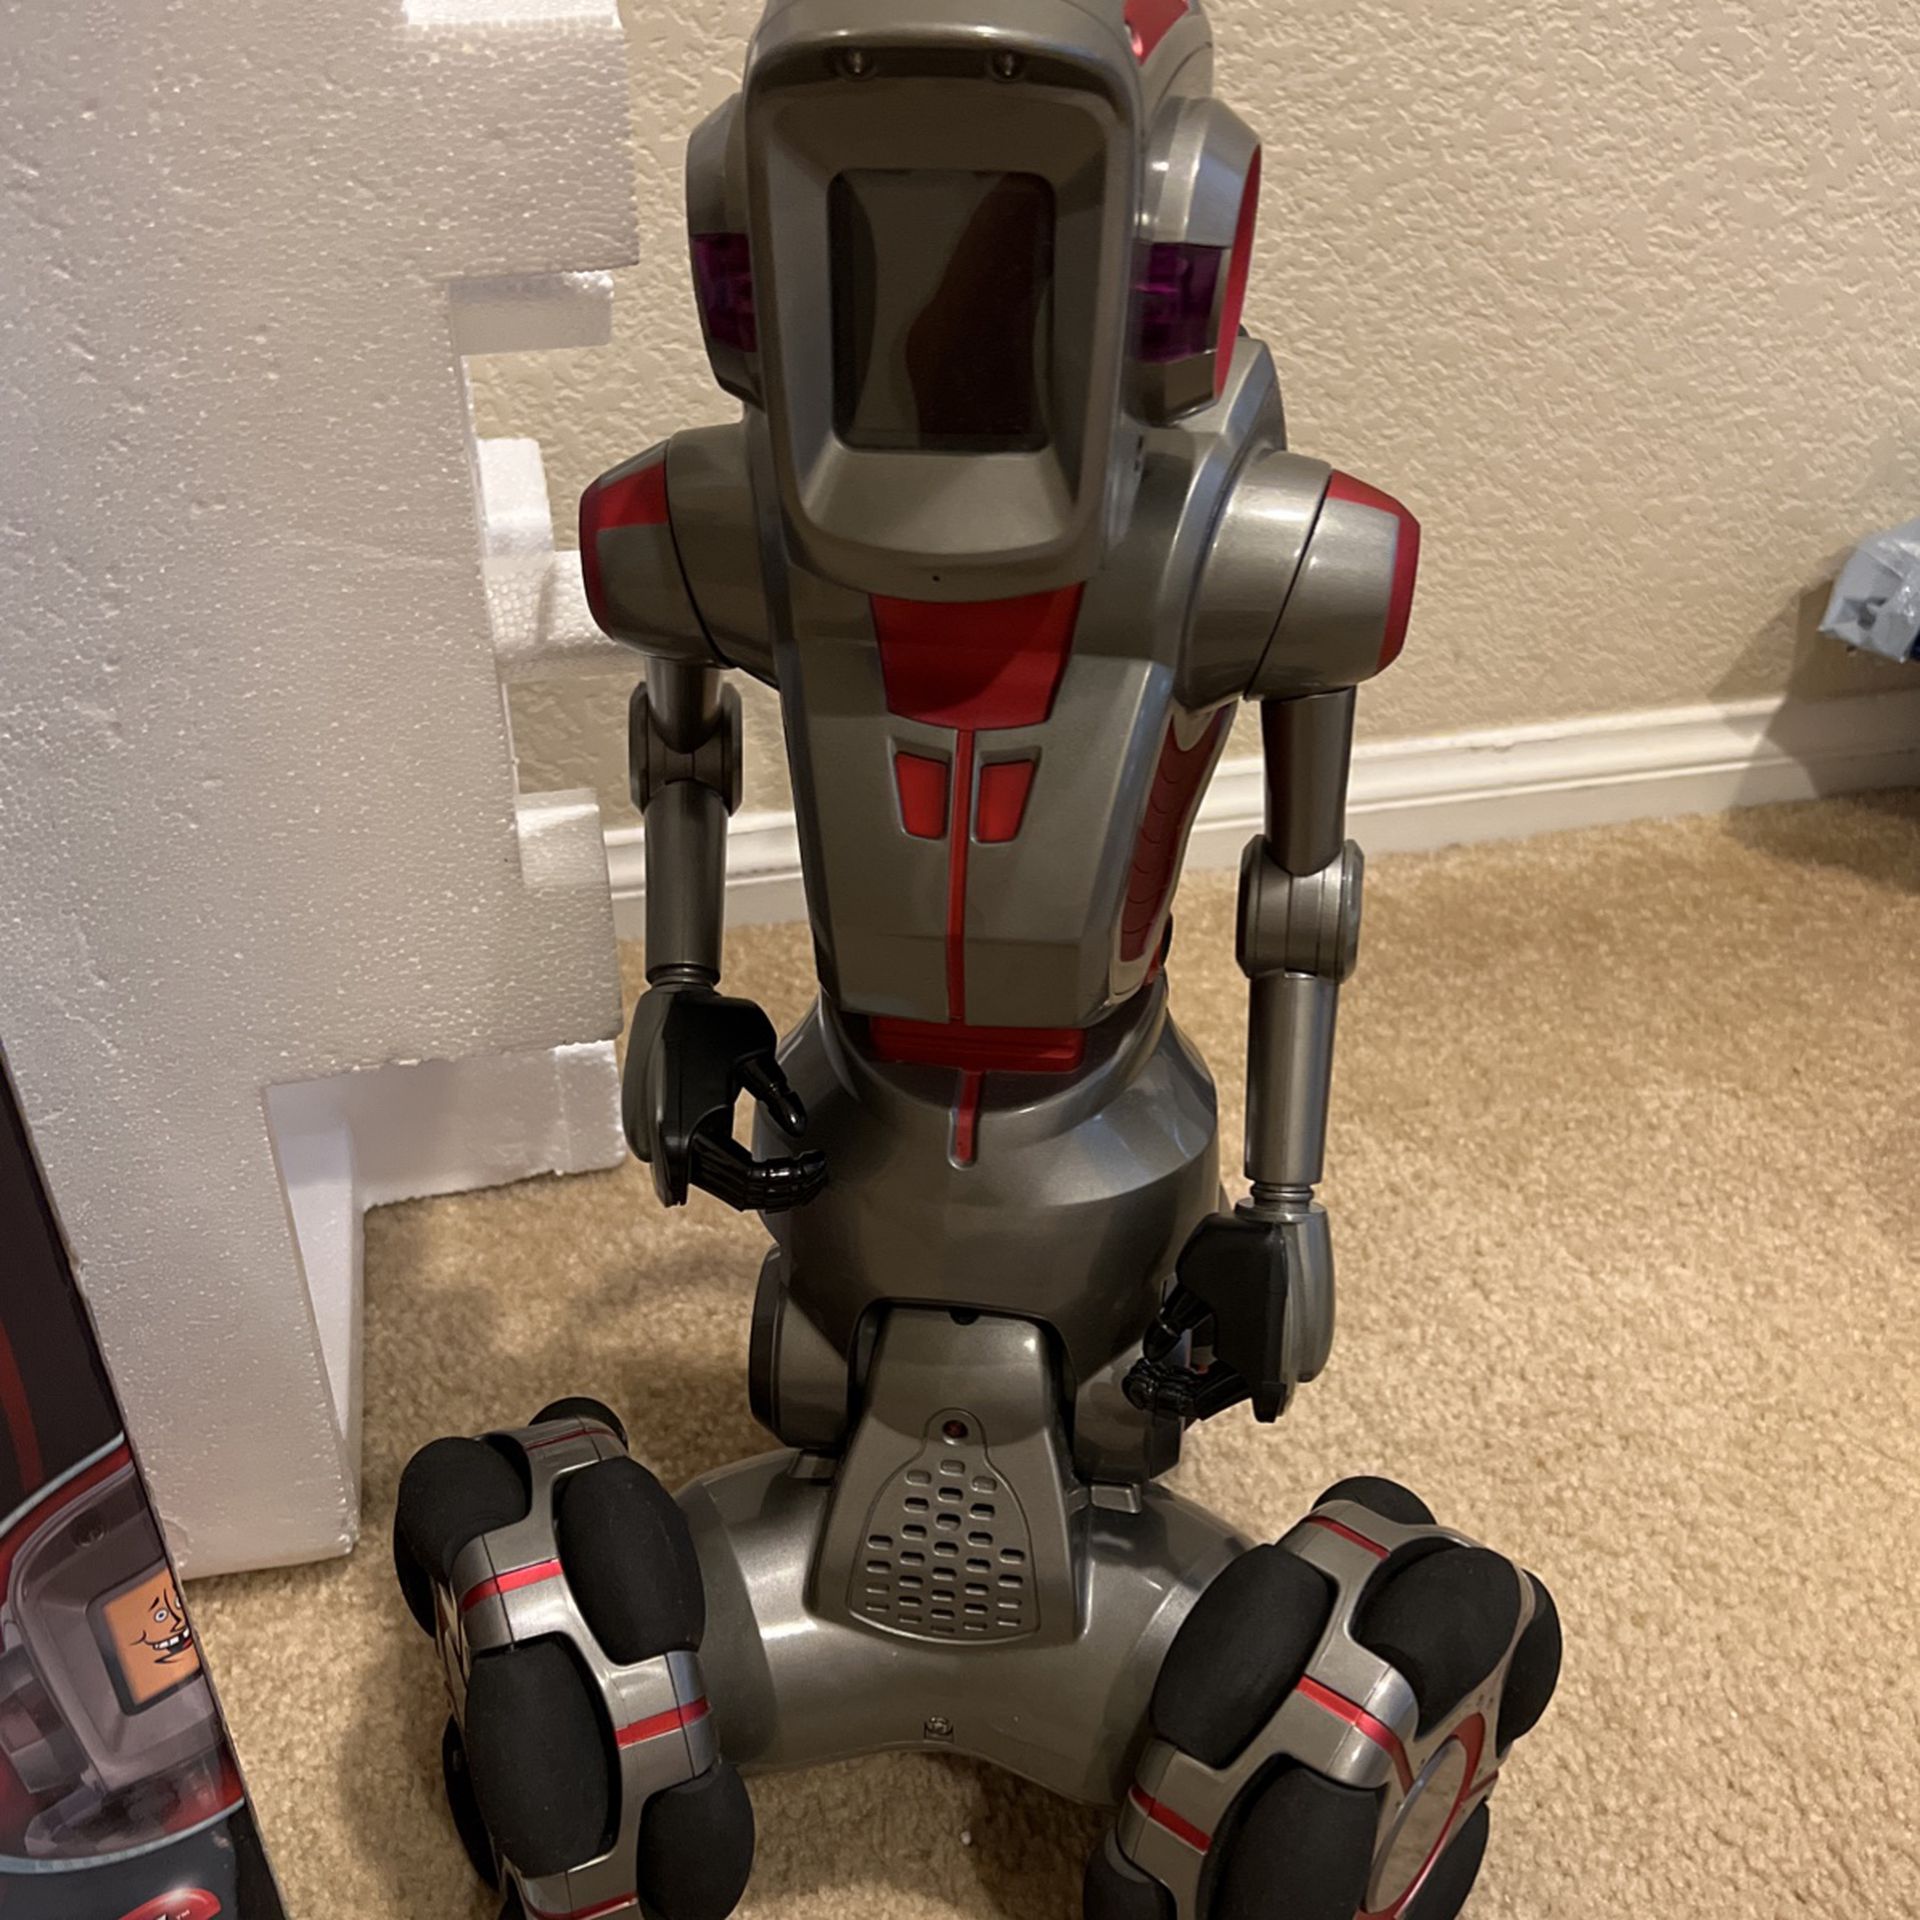 Rare Wow wee Mr. Personality Robot and Remote Control Tested Works Great!